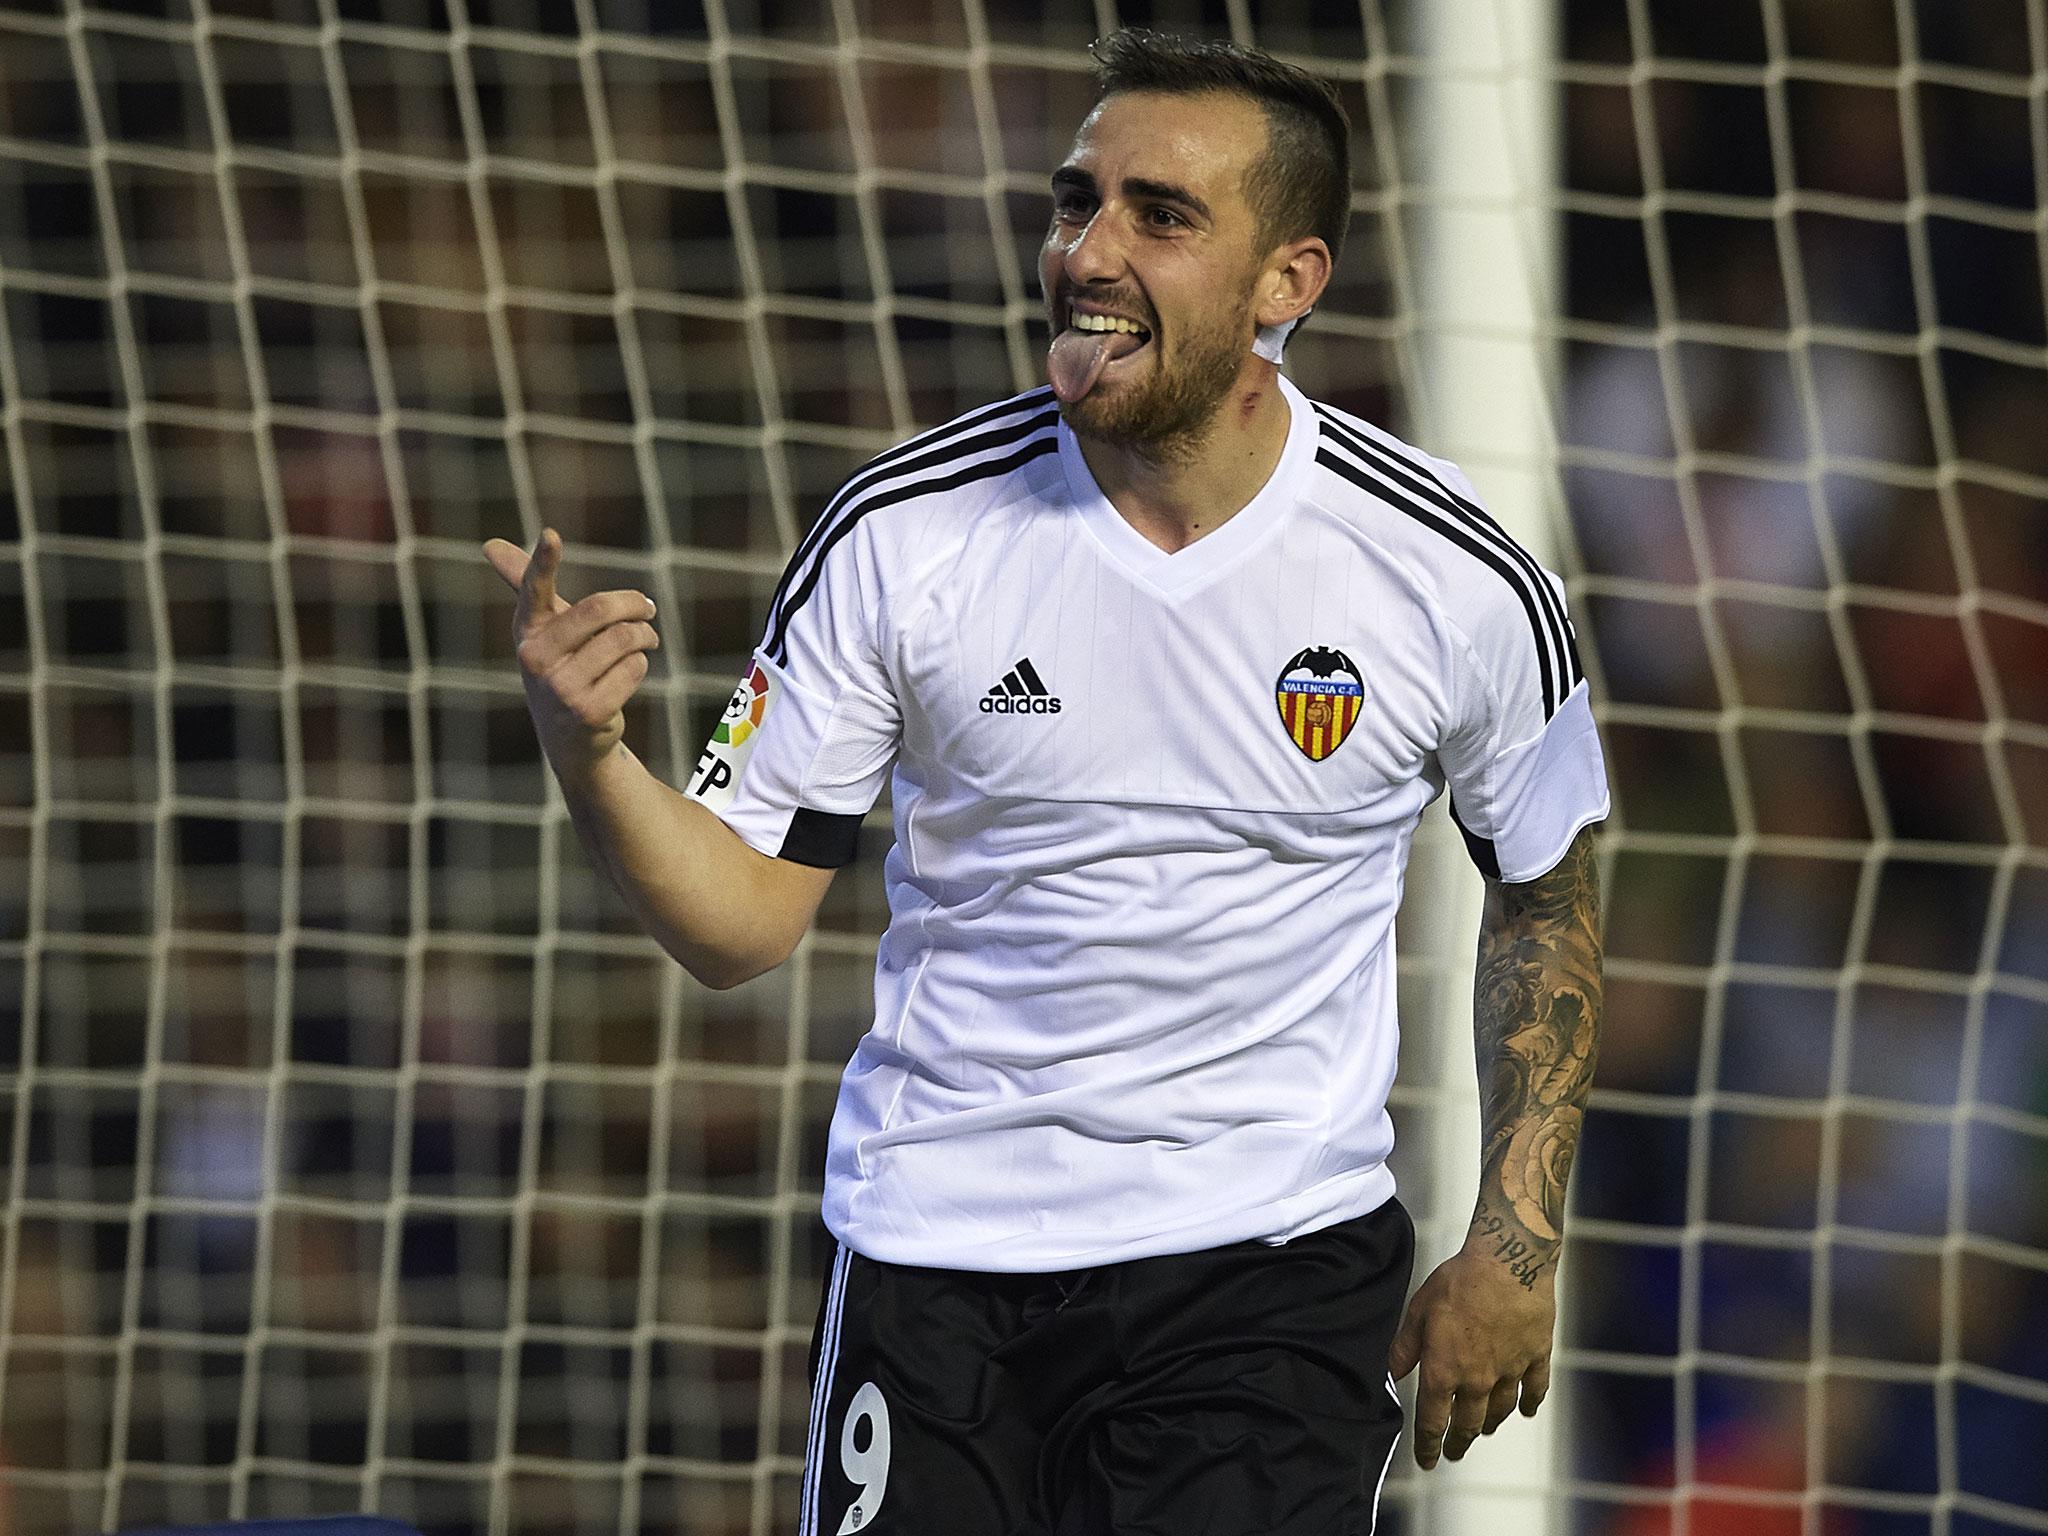 Valencia vs Real Madrid, match report: Gary Neville says he's in it